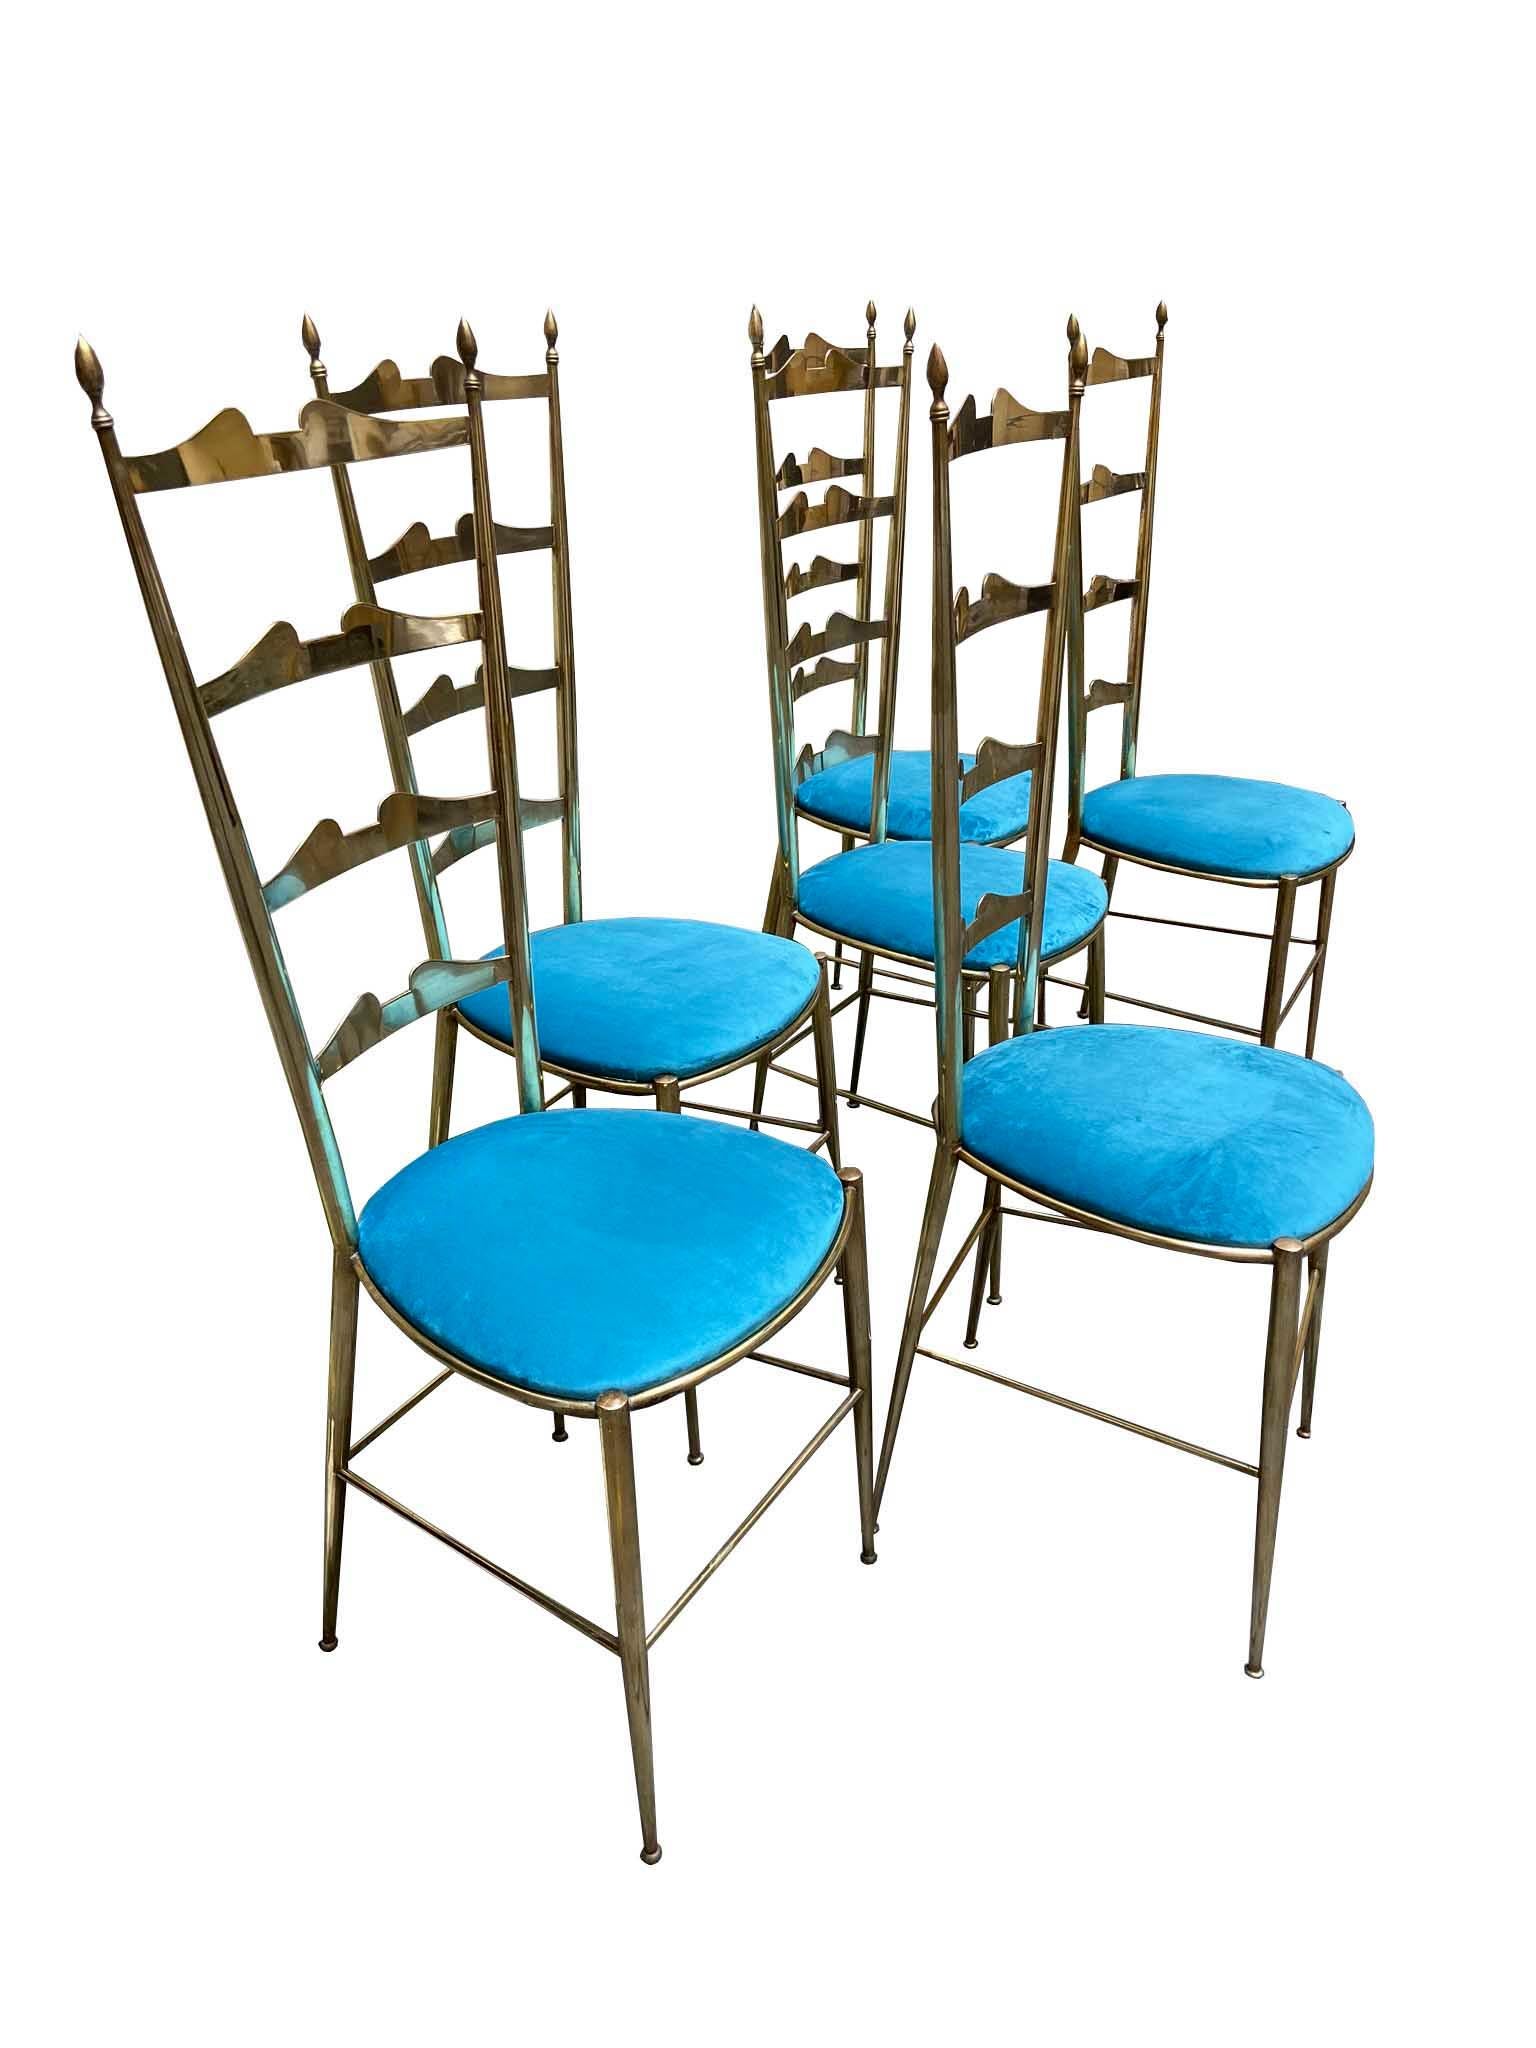 Fabulous six chairs by Chiavari designed and manufactured in 1950s period, Italy.
Brass elegant chair frame with tall ladder shape back seat and original seating covered in velvet fabric.